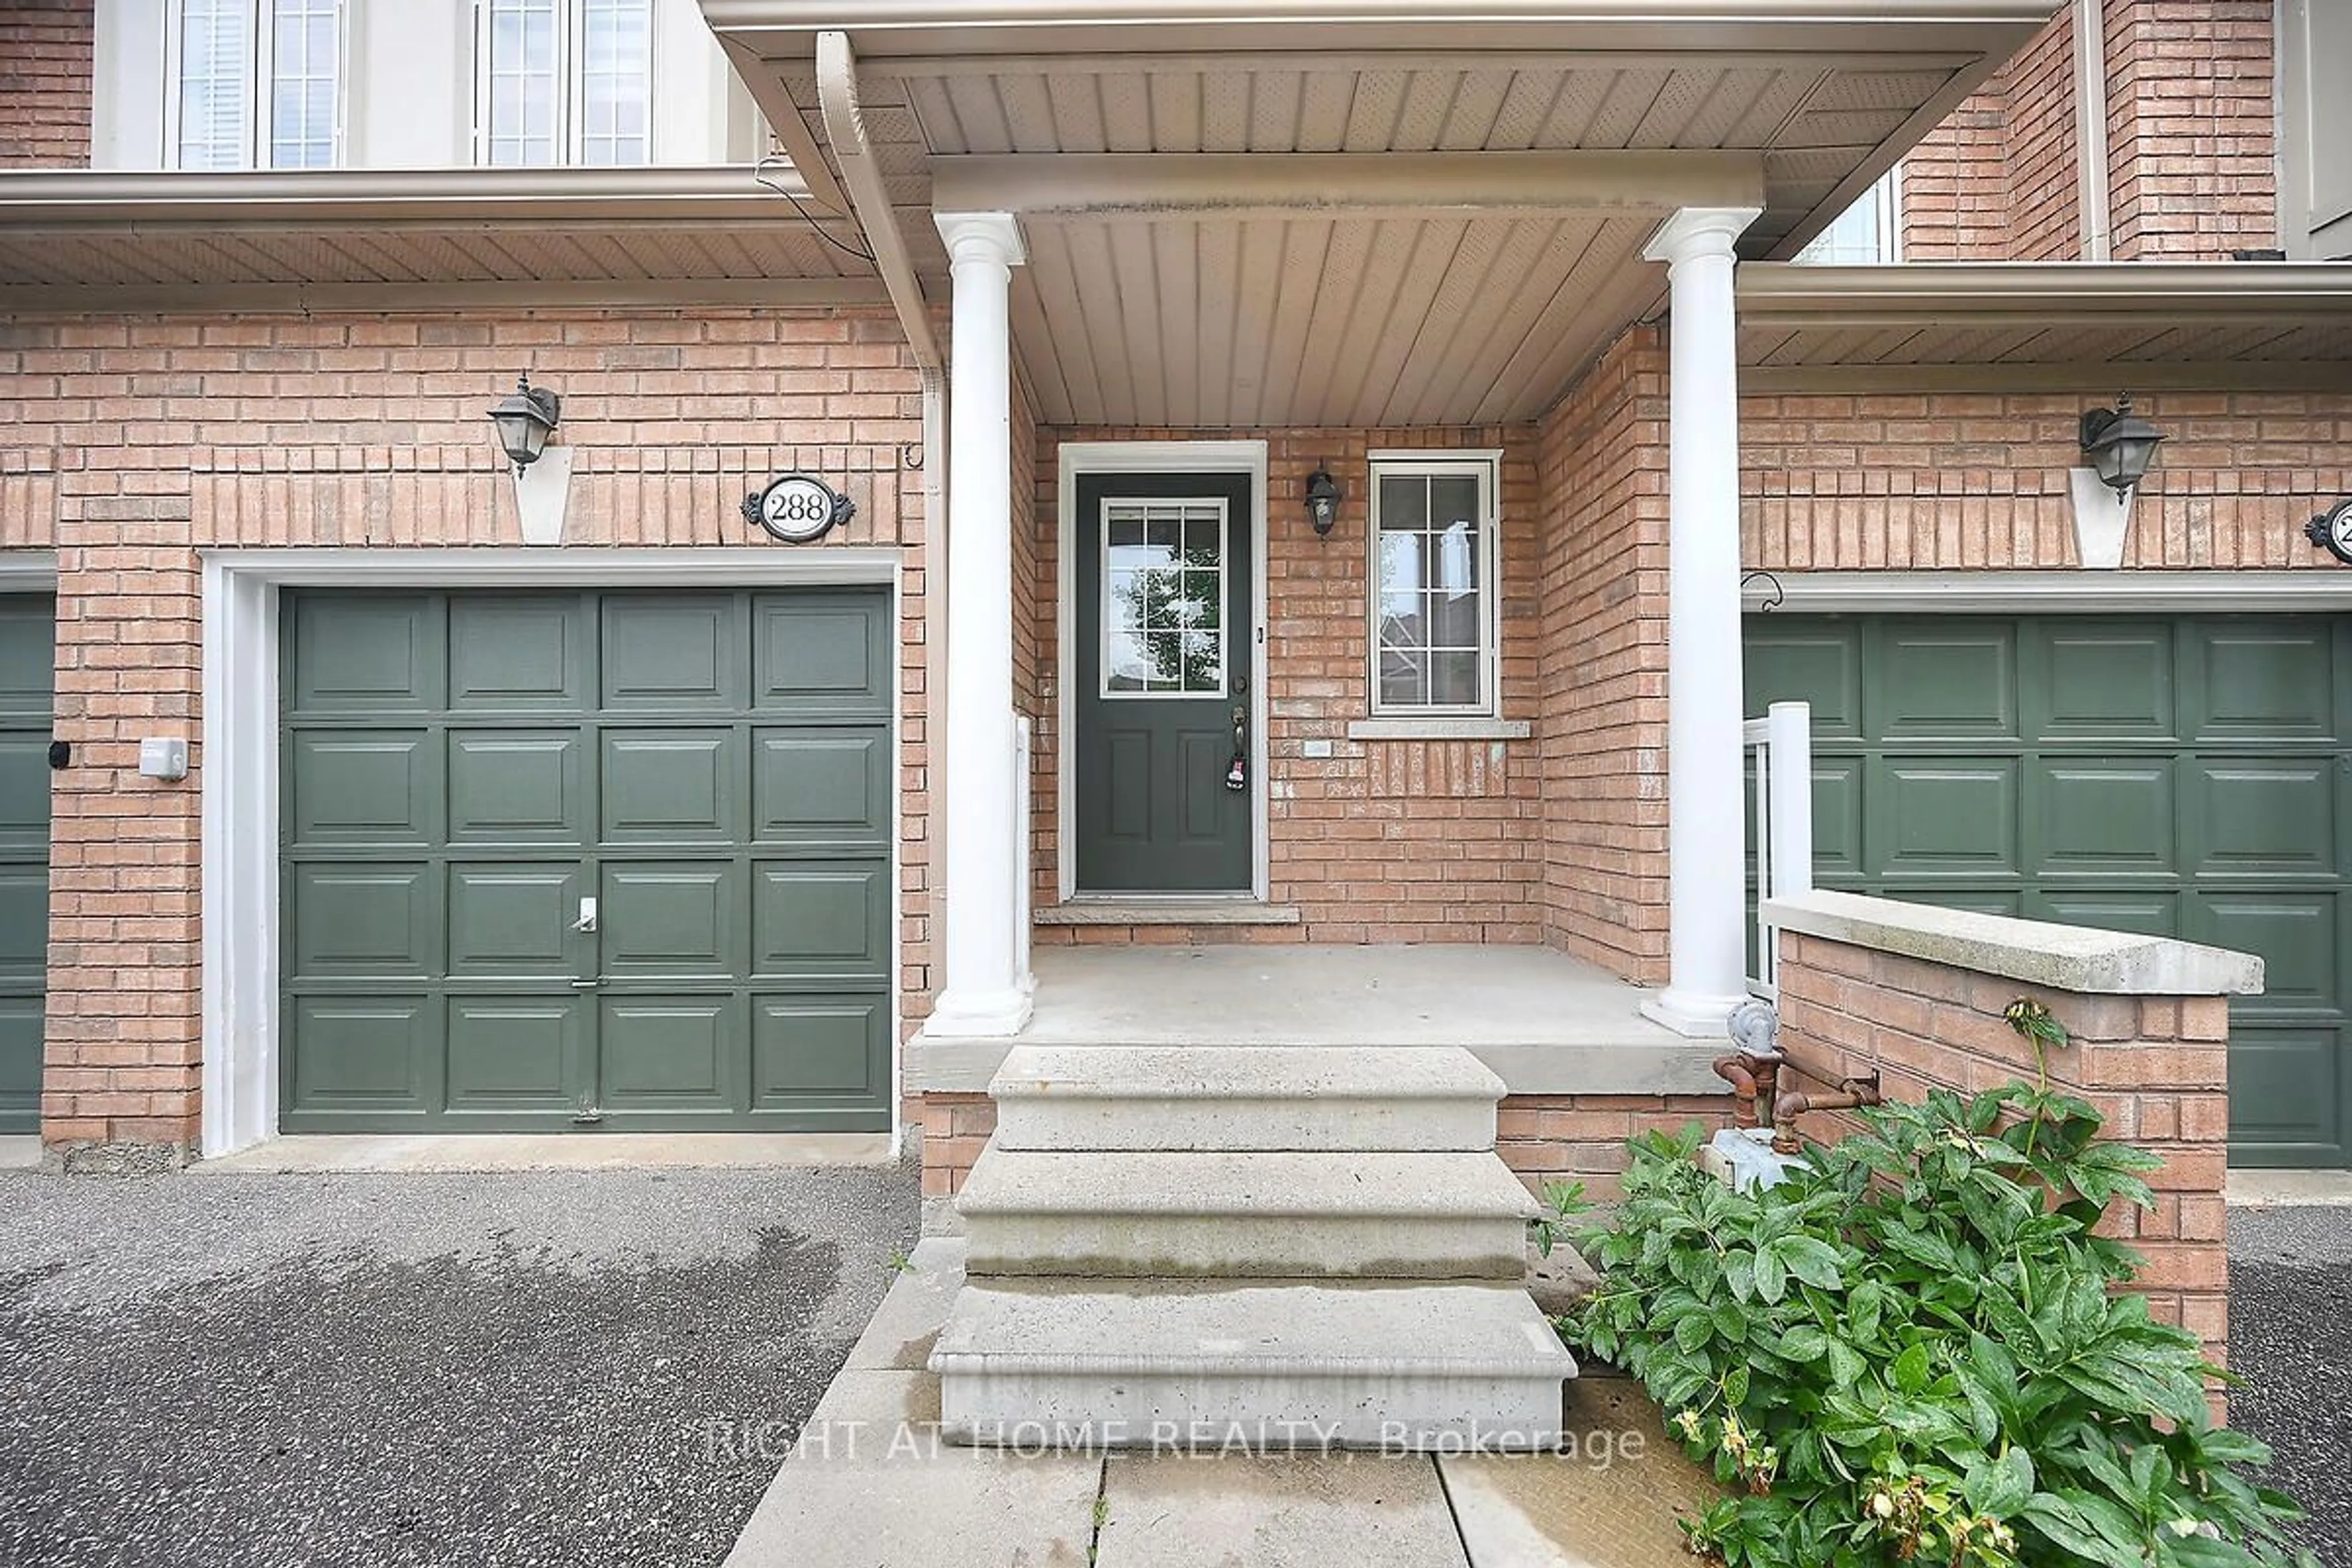 Home with brick exterior material for 7360 Zinnia Pl #288, Mississauga Ontario L5W 2A3